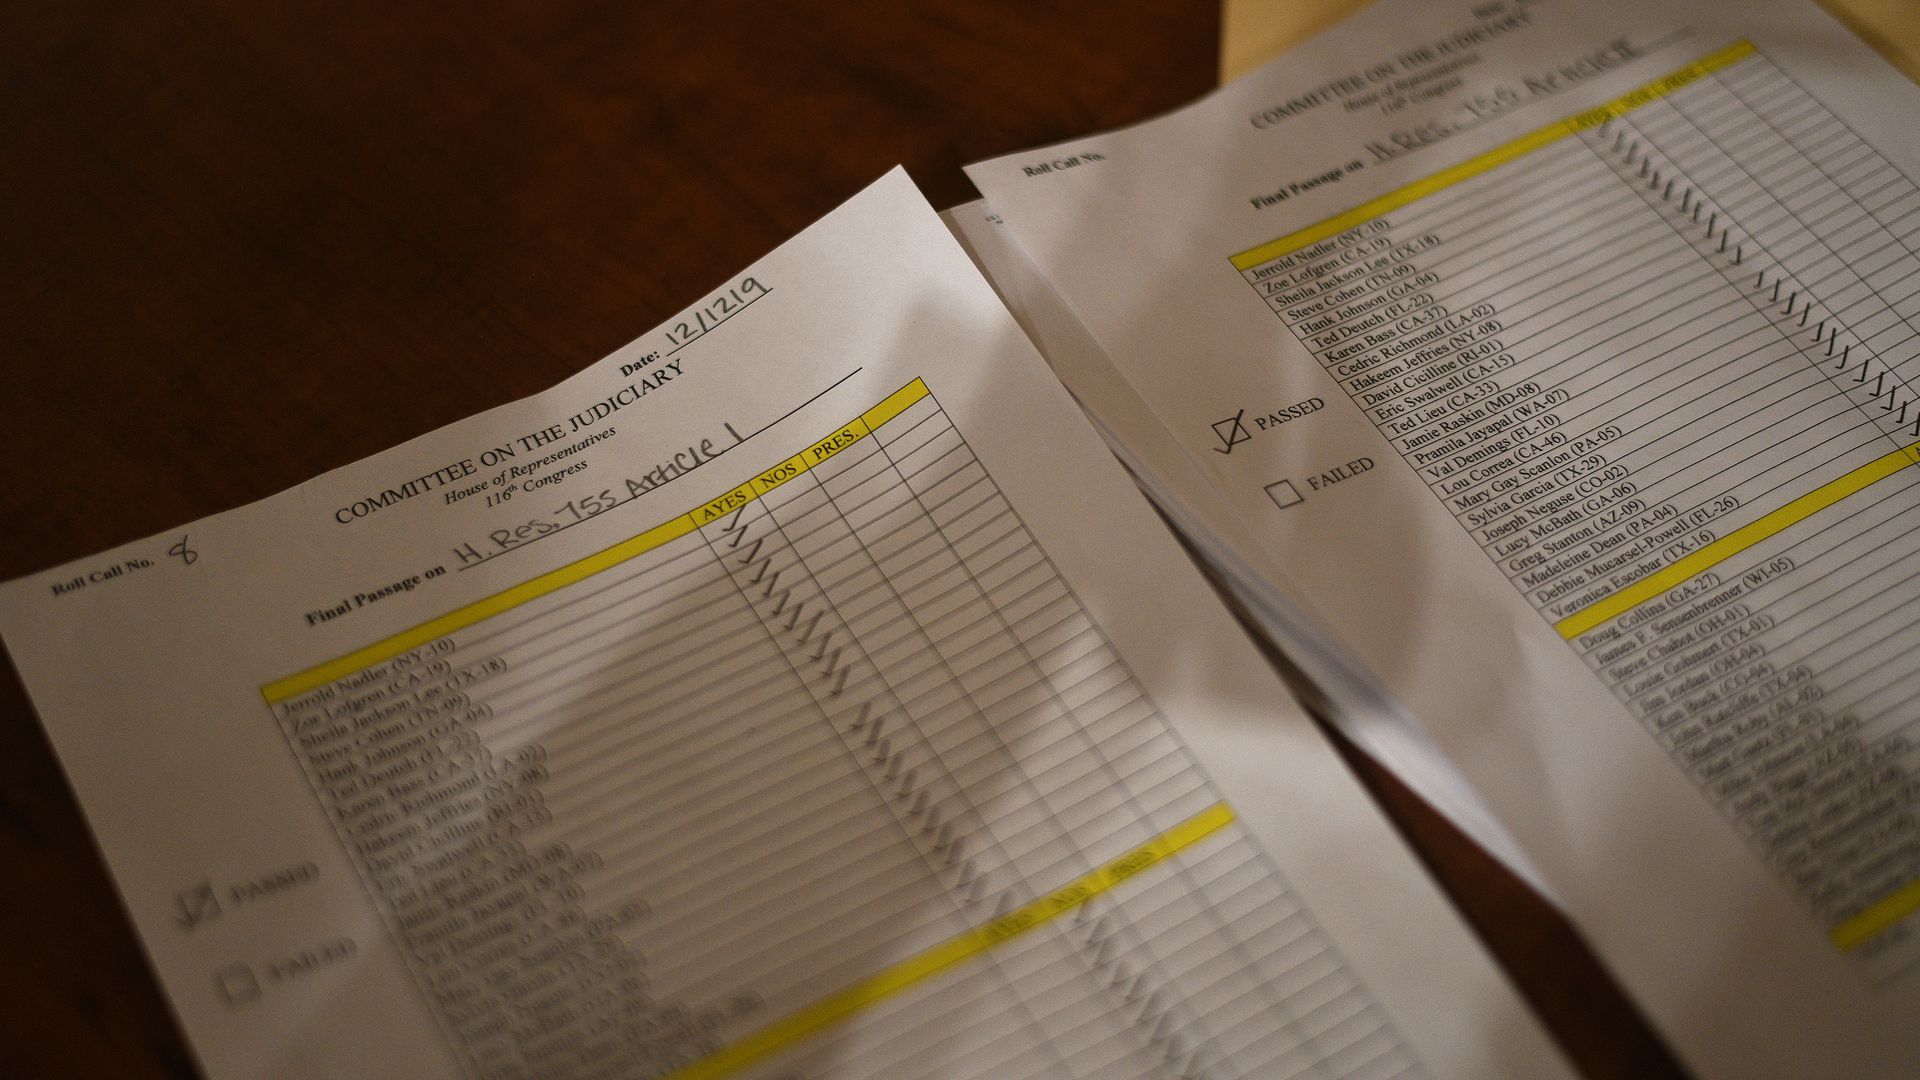 The paperwork documenting the House Judiciary Committee member vote, Dec. 13